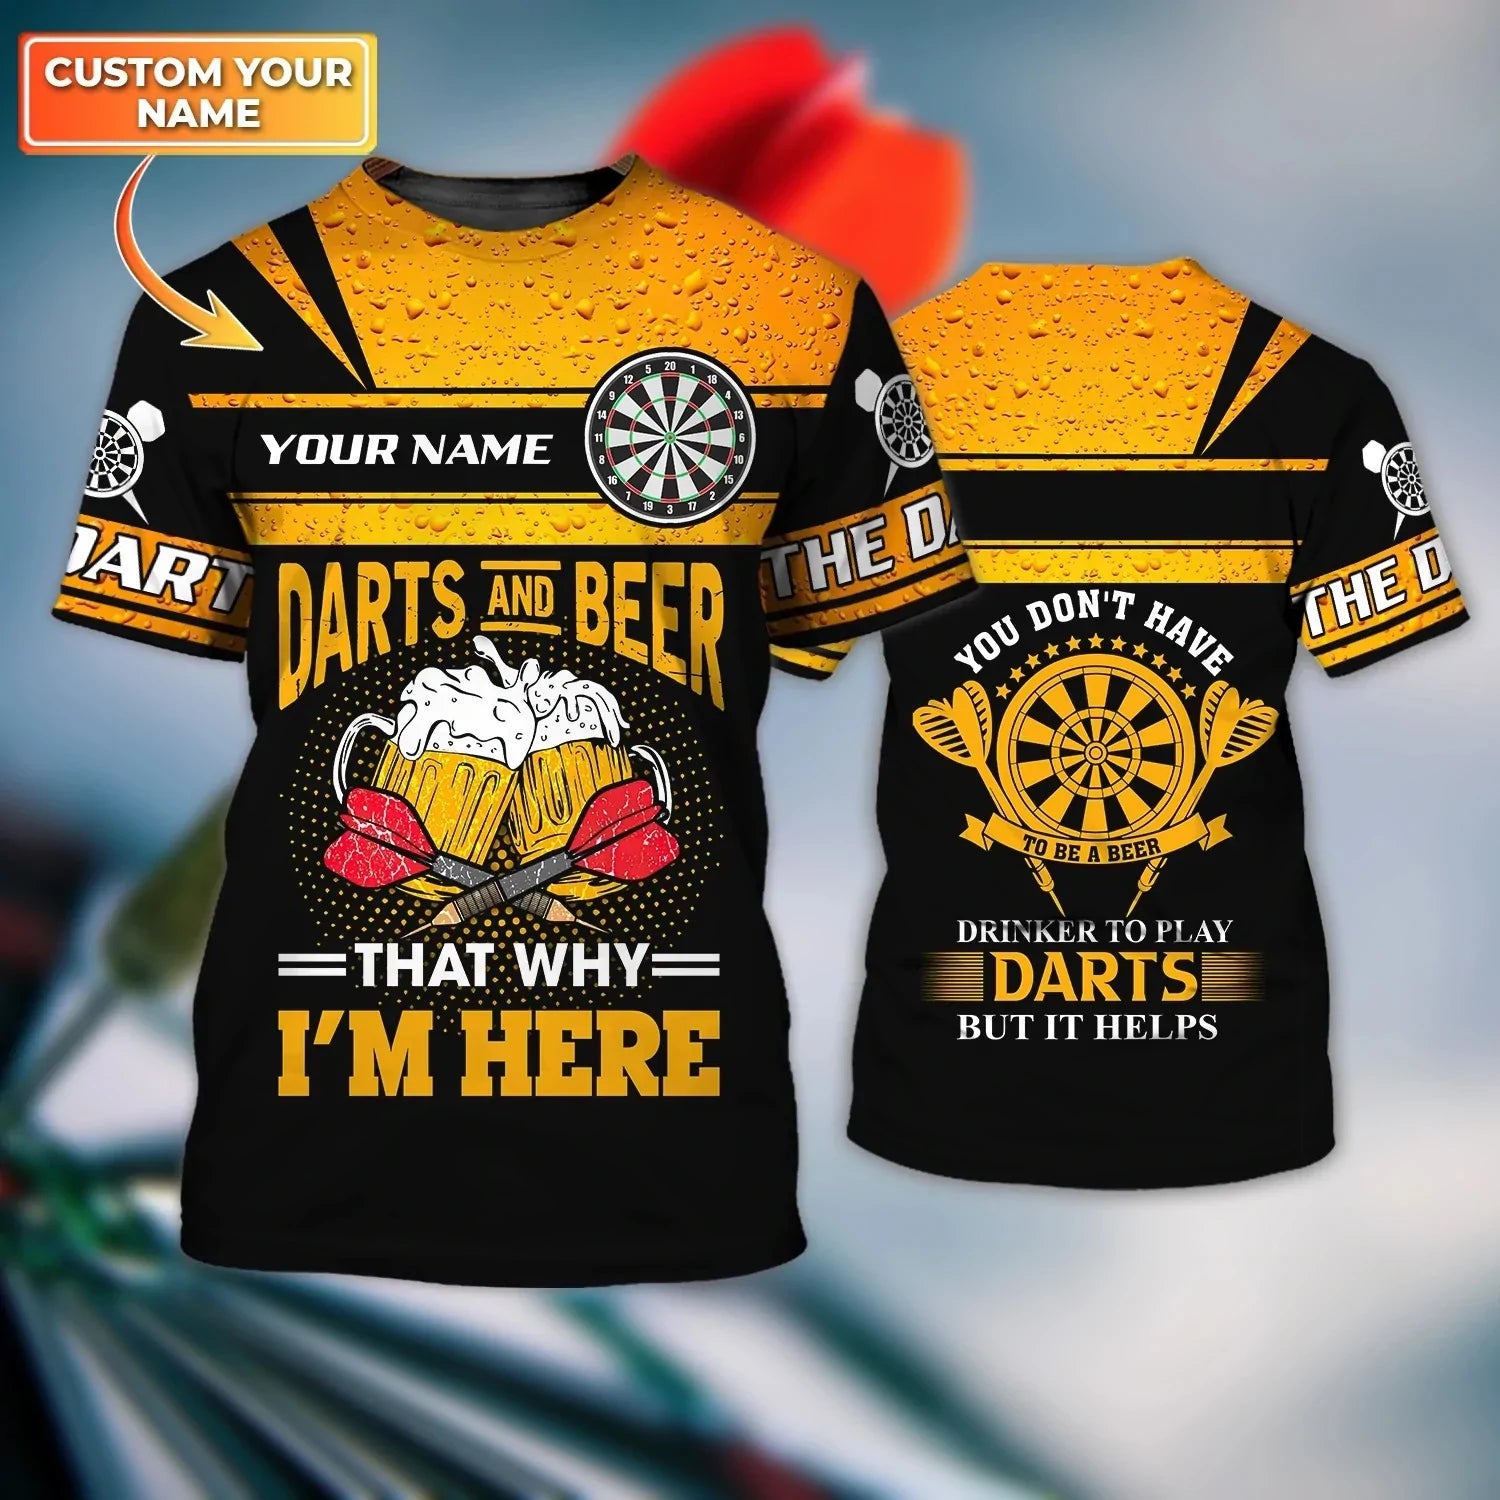 custom with name dart and beer 3d full printed shirt for best dart player dart lover present birthday gift to dart player dt004 j40cg